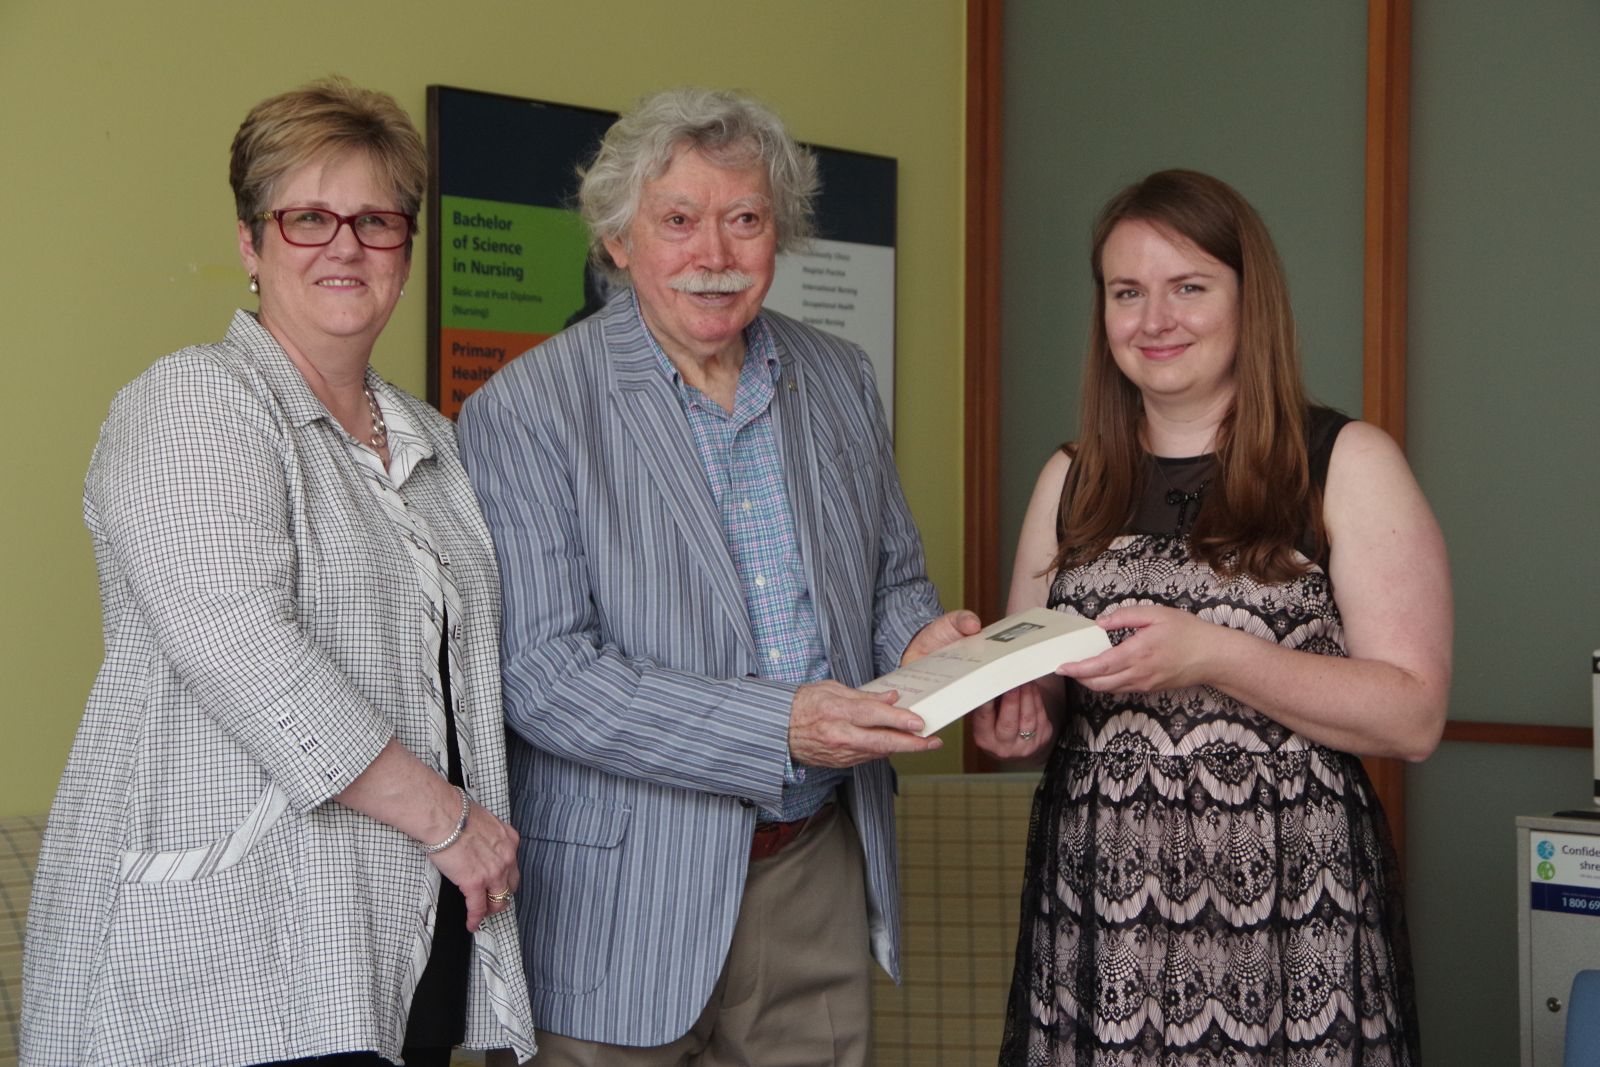 Image of author donating book to library